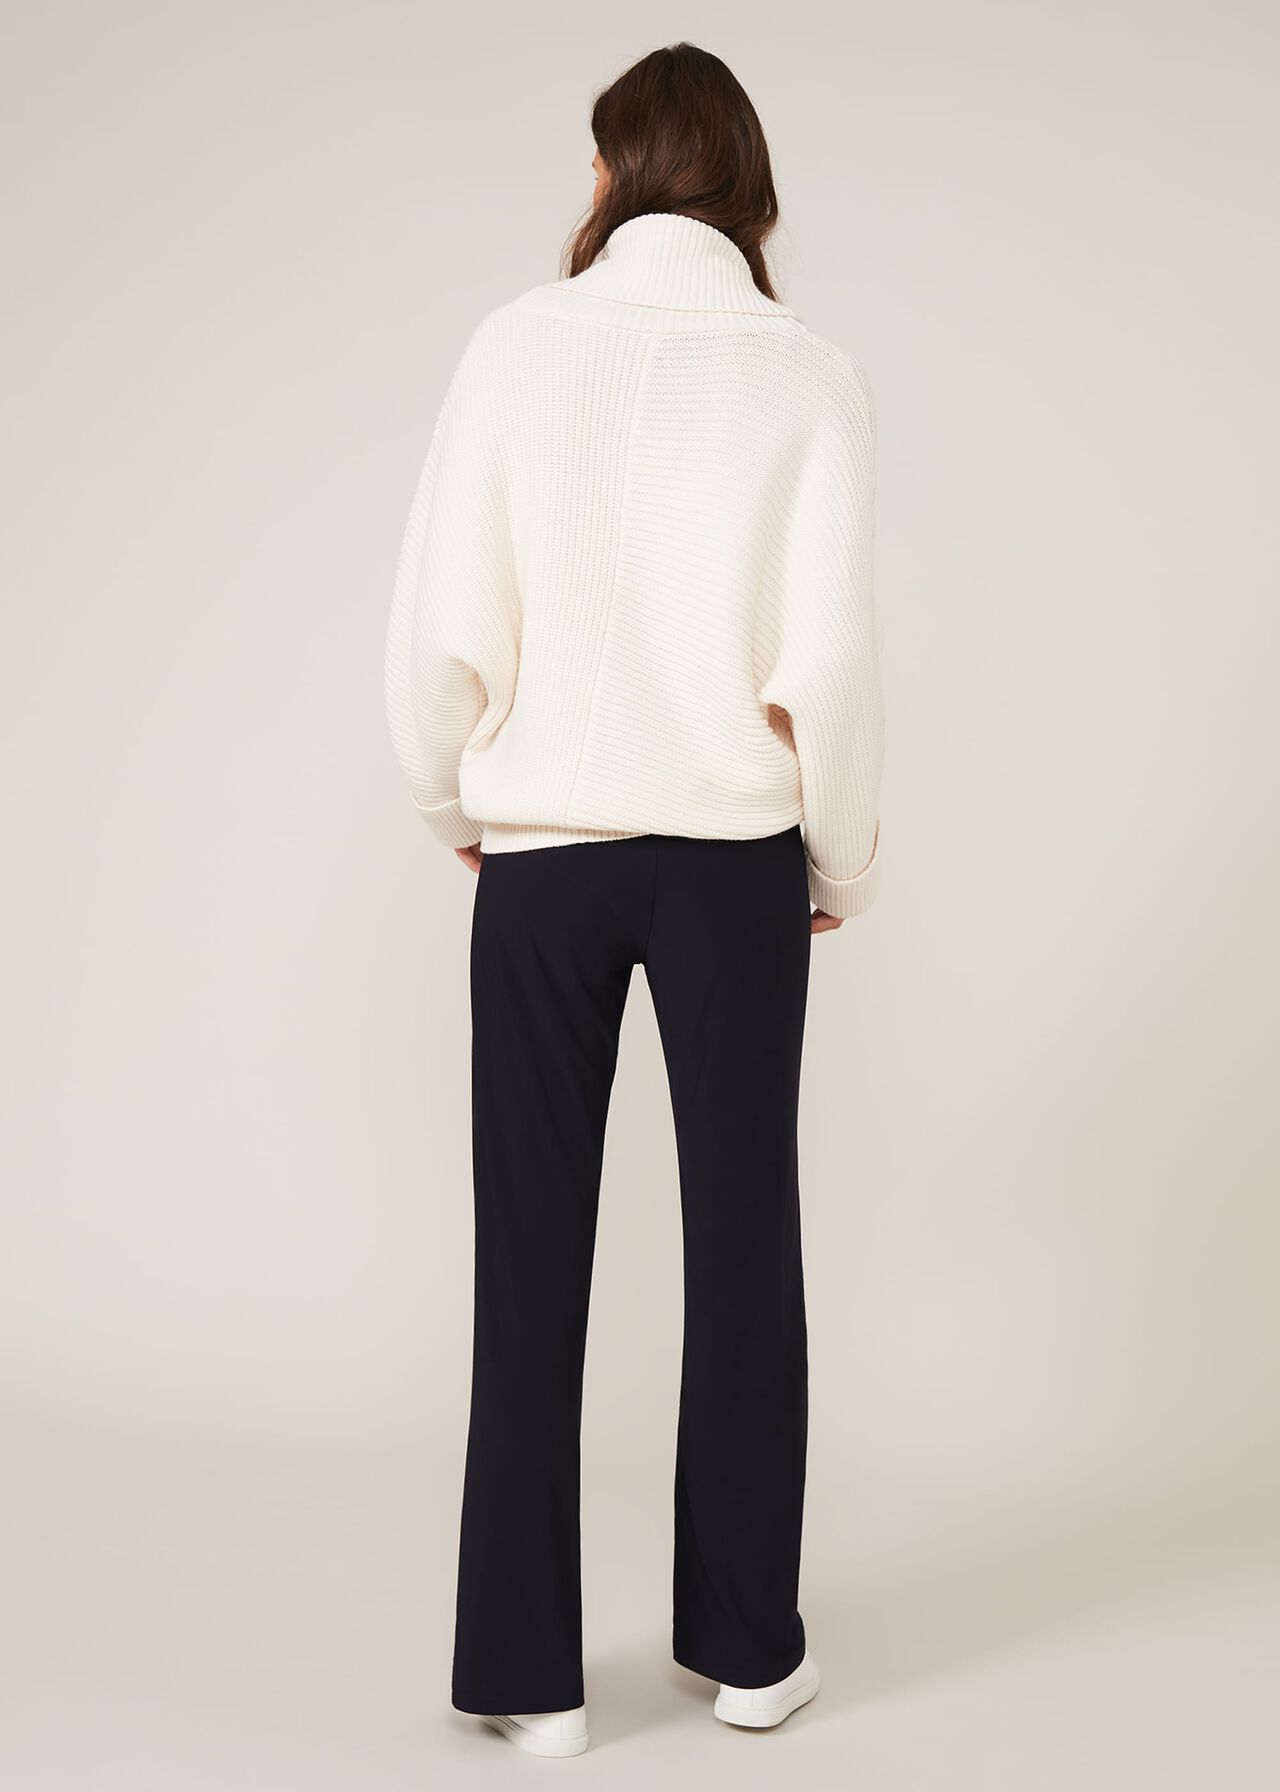 Corinne Jersey Trousers